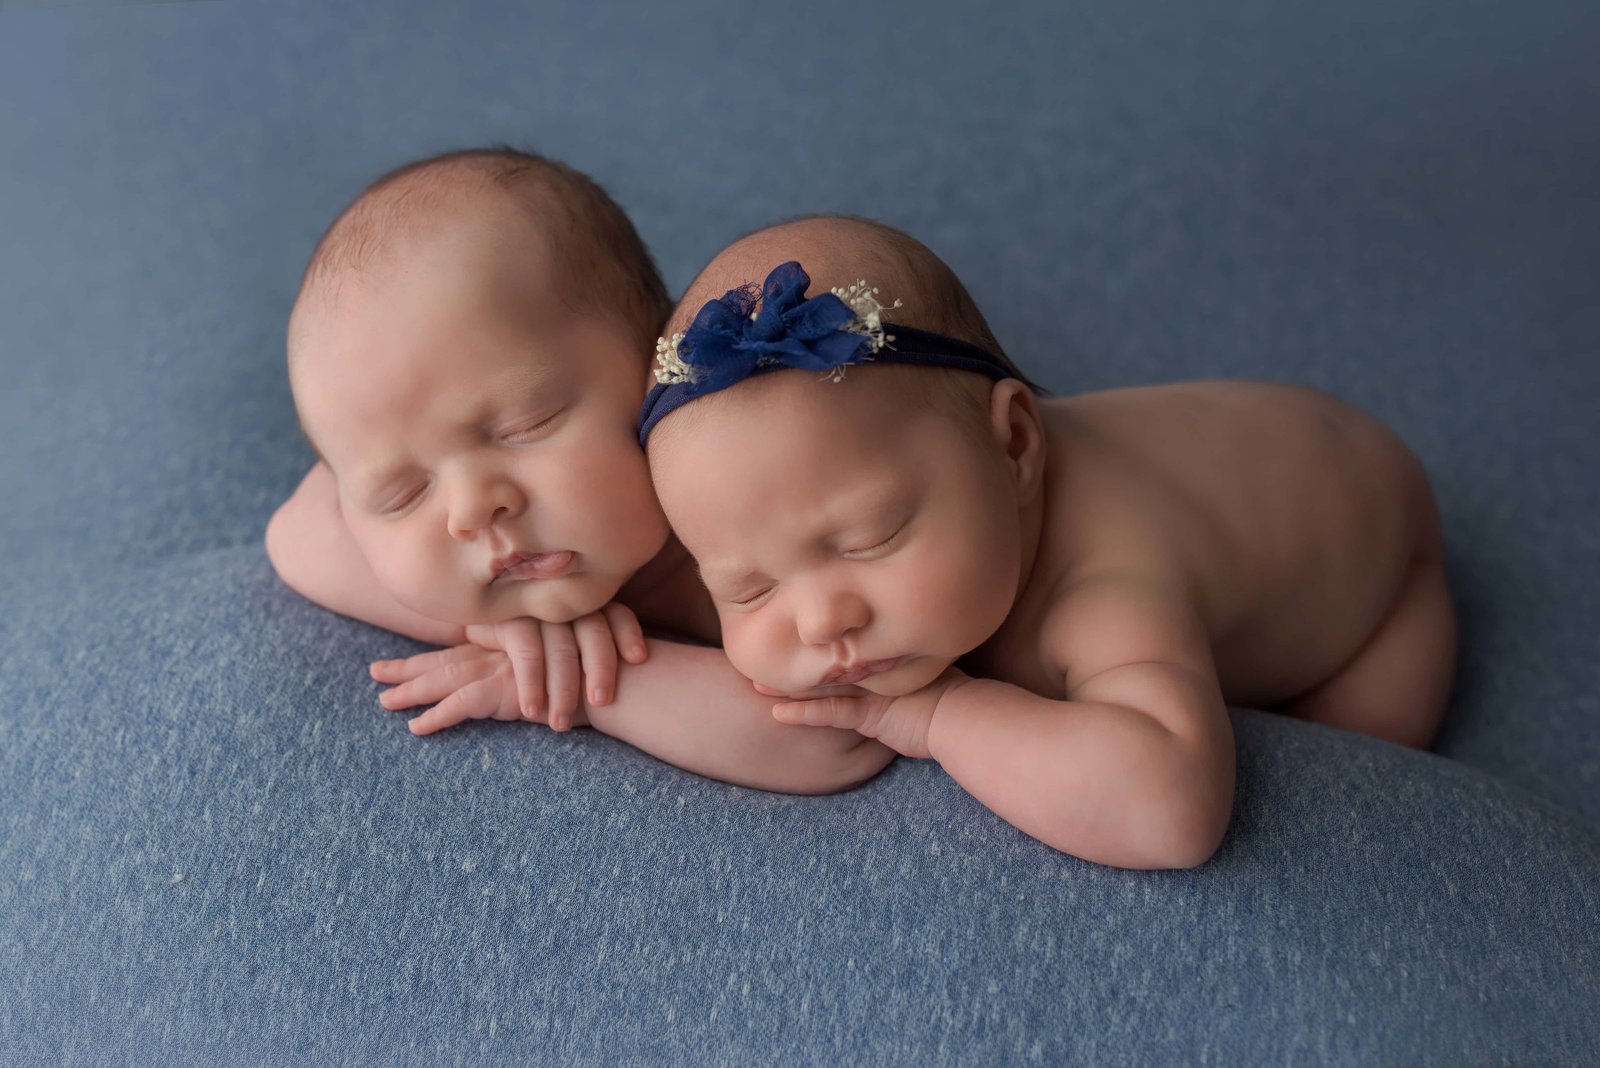 newborn twins sleeping posed with heads on hands lying on a blue blanket